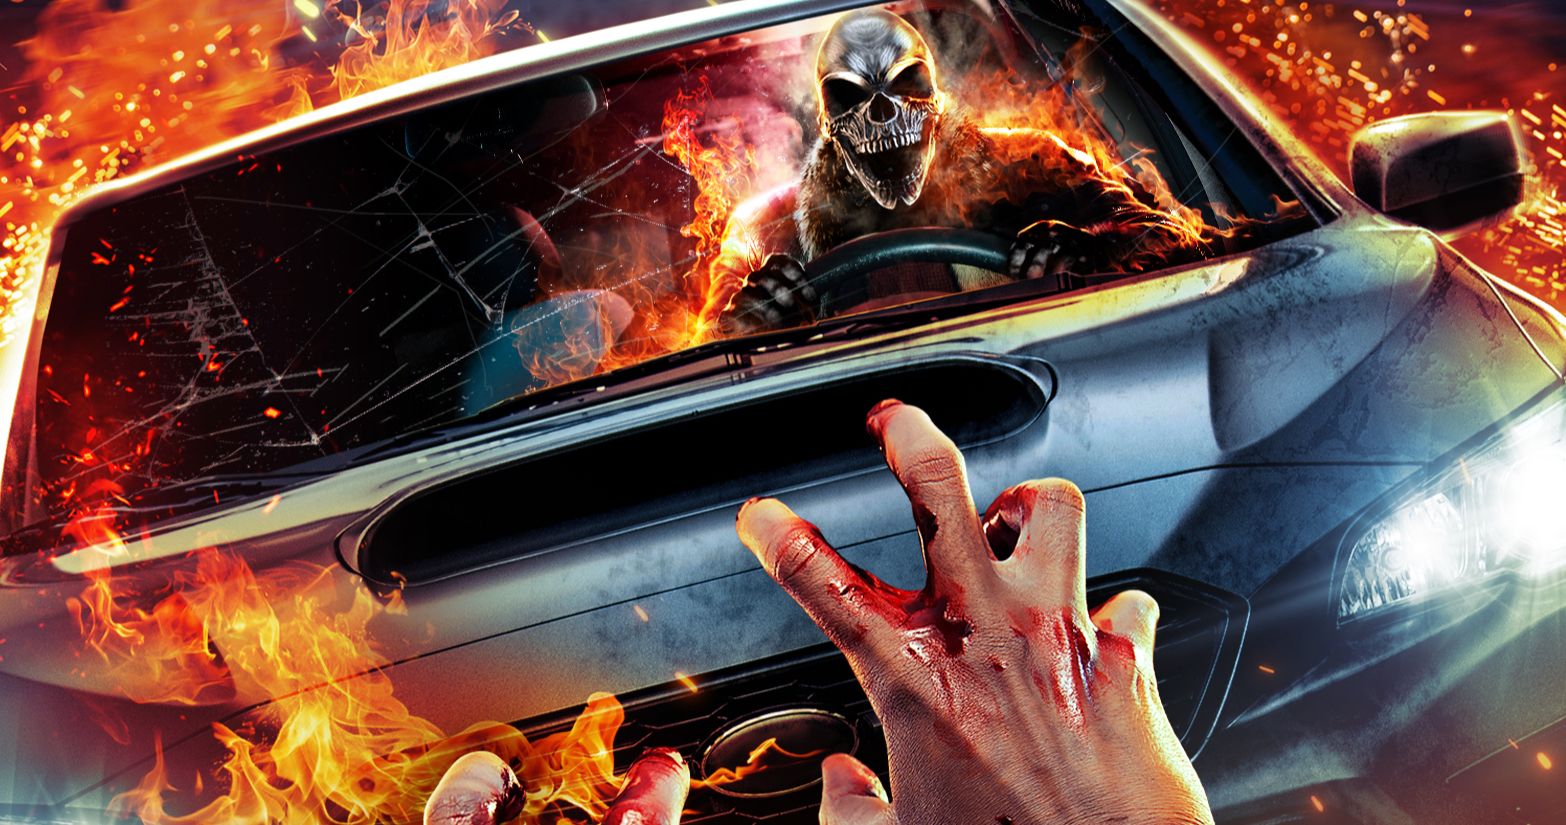 The Final Ride Trailer: Uber Horror Anthology Spins Three Tales of Backseat Terror